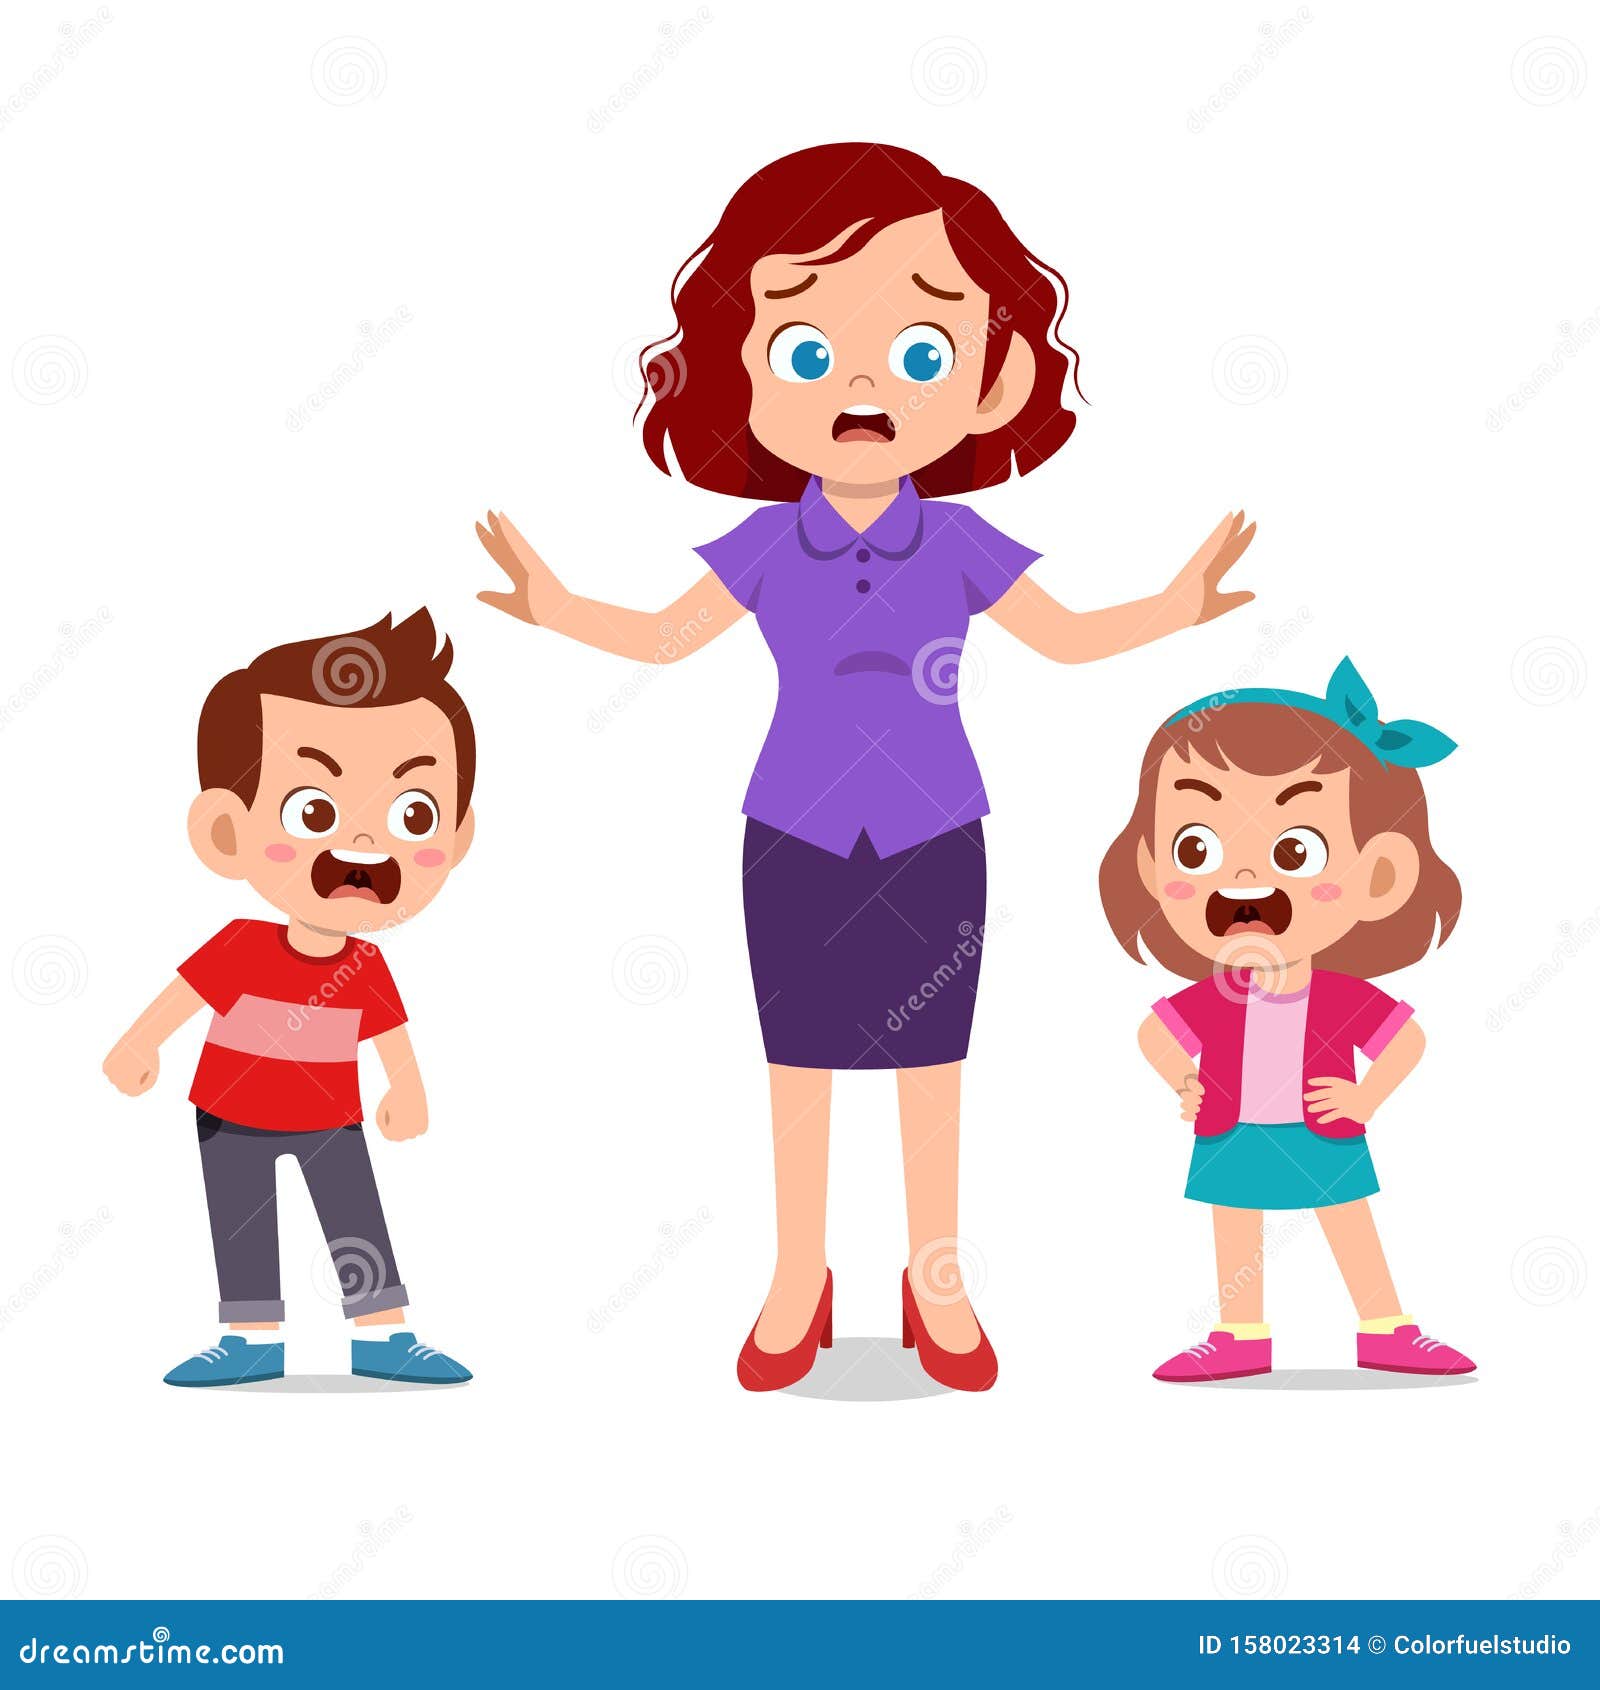 2,204 Angry Mom Cartoon Images, Stock Photos, 3D objects, & Vectors